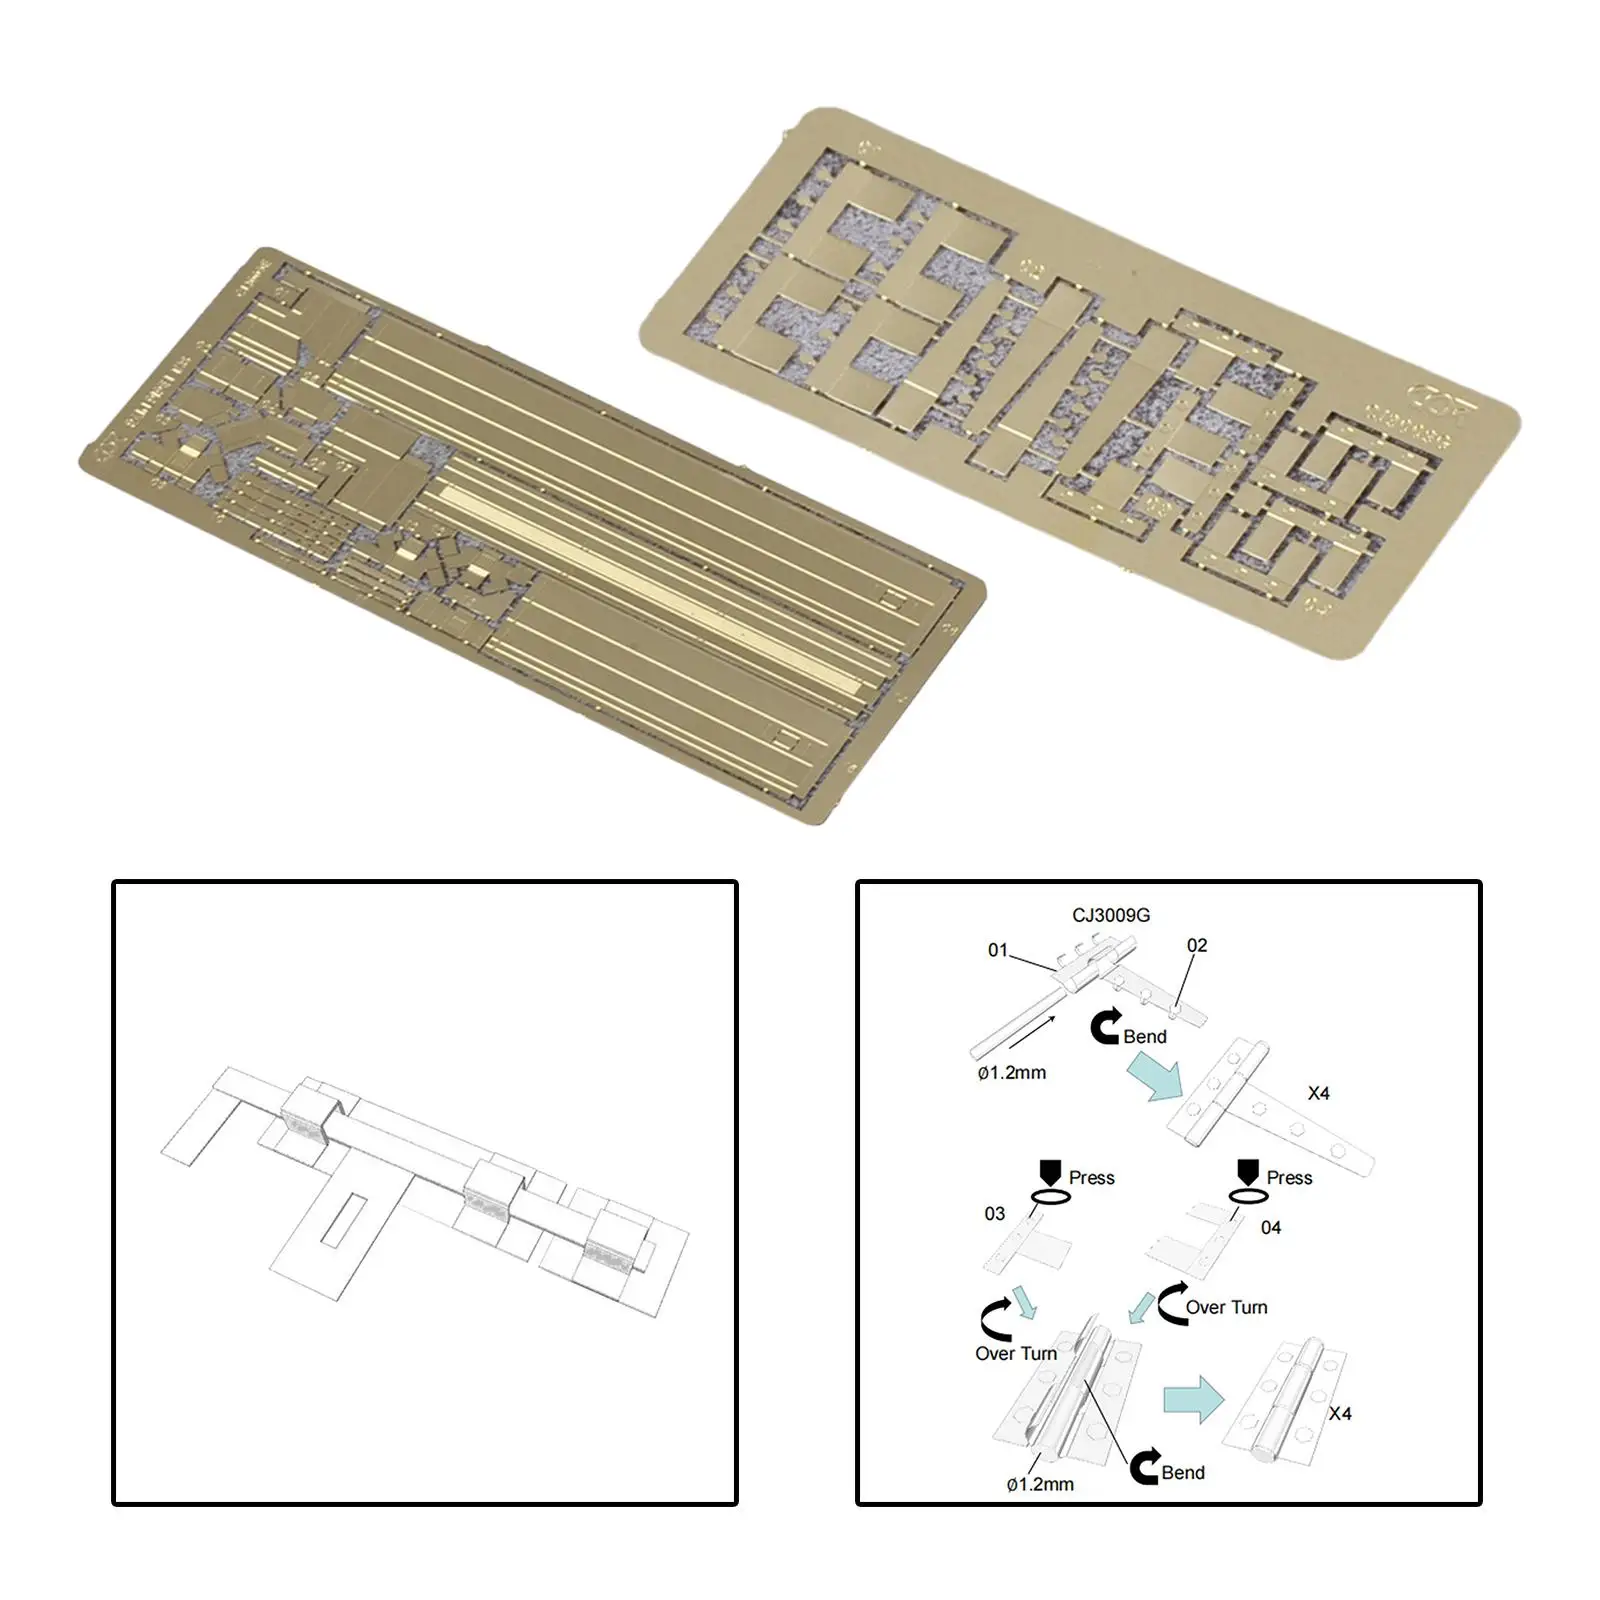 1/35 DIY 3D Puzzle Model Brass Hinge Scene Tabletop Decor Crafts Airbrush Templates and Stencils Building Accessories Handmade